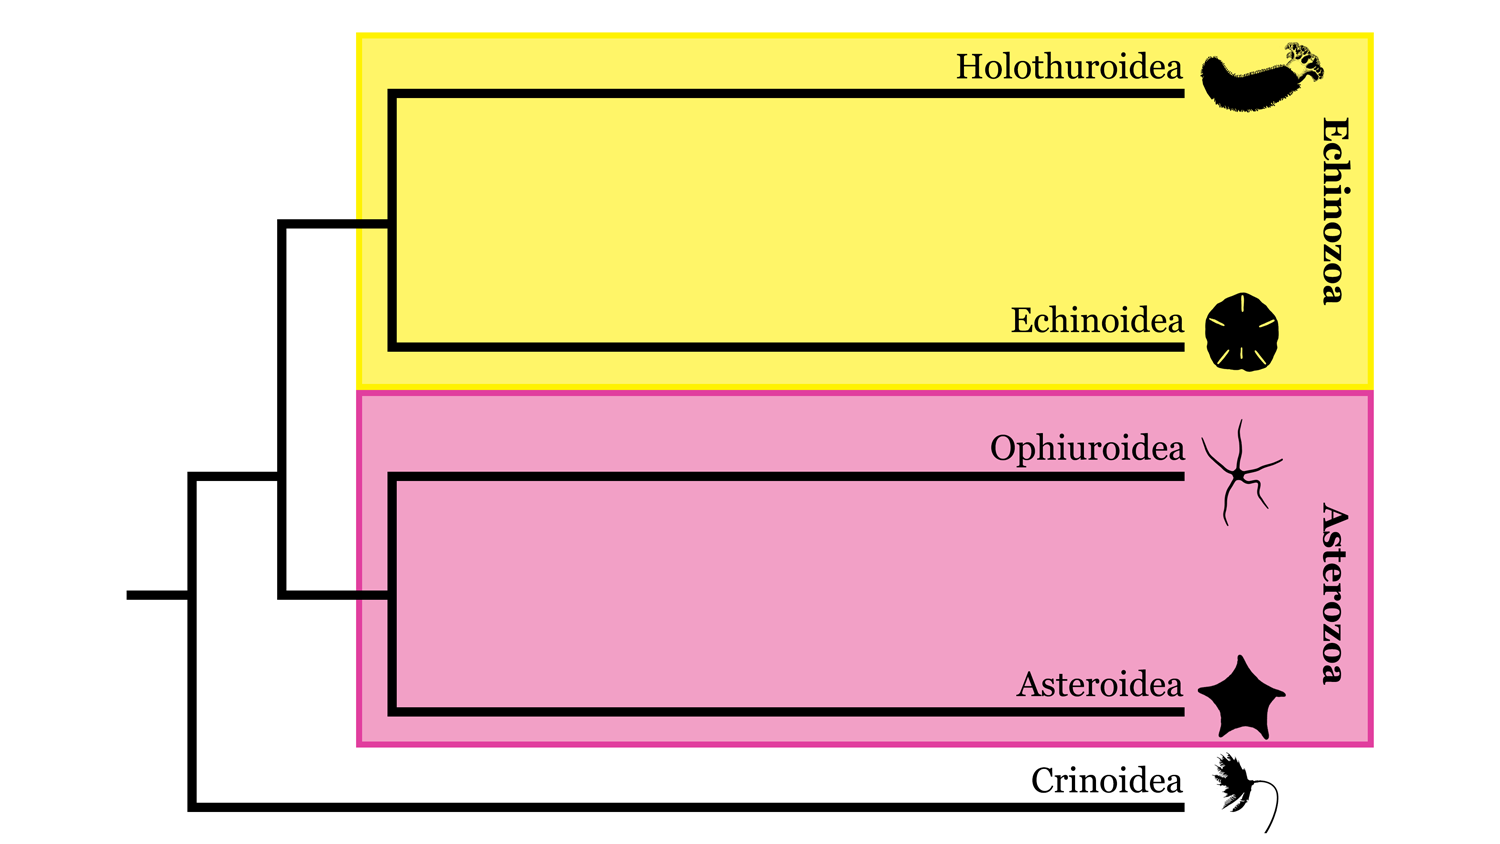 Image of a simplified Phylum Echinodermata phylogeny